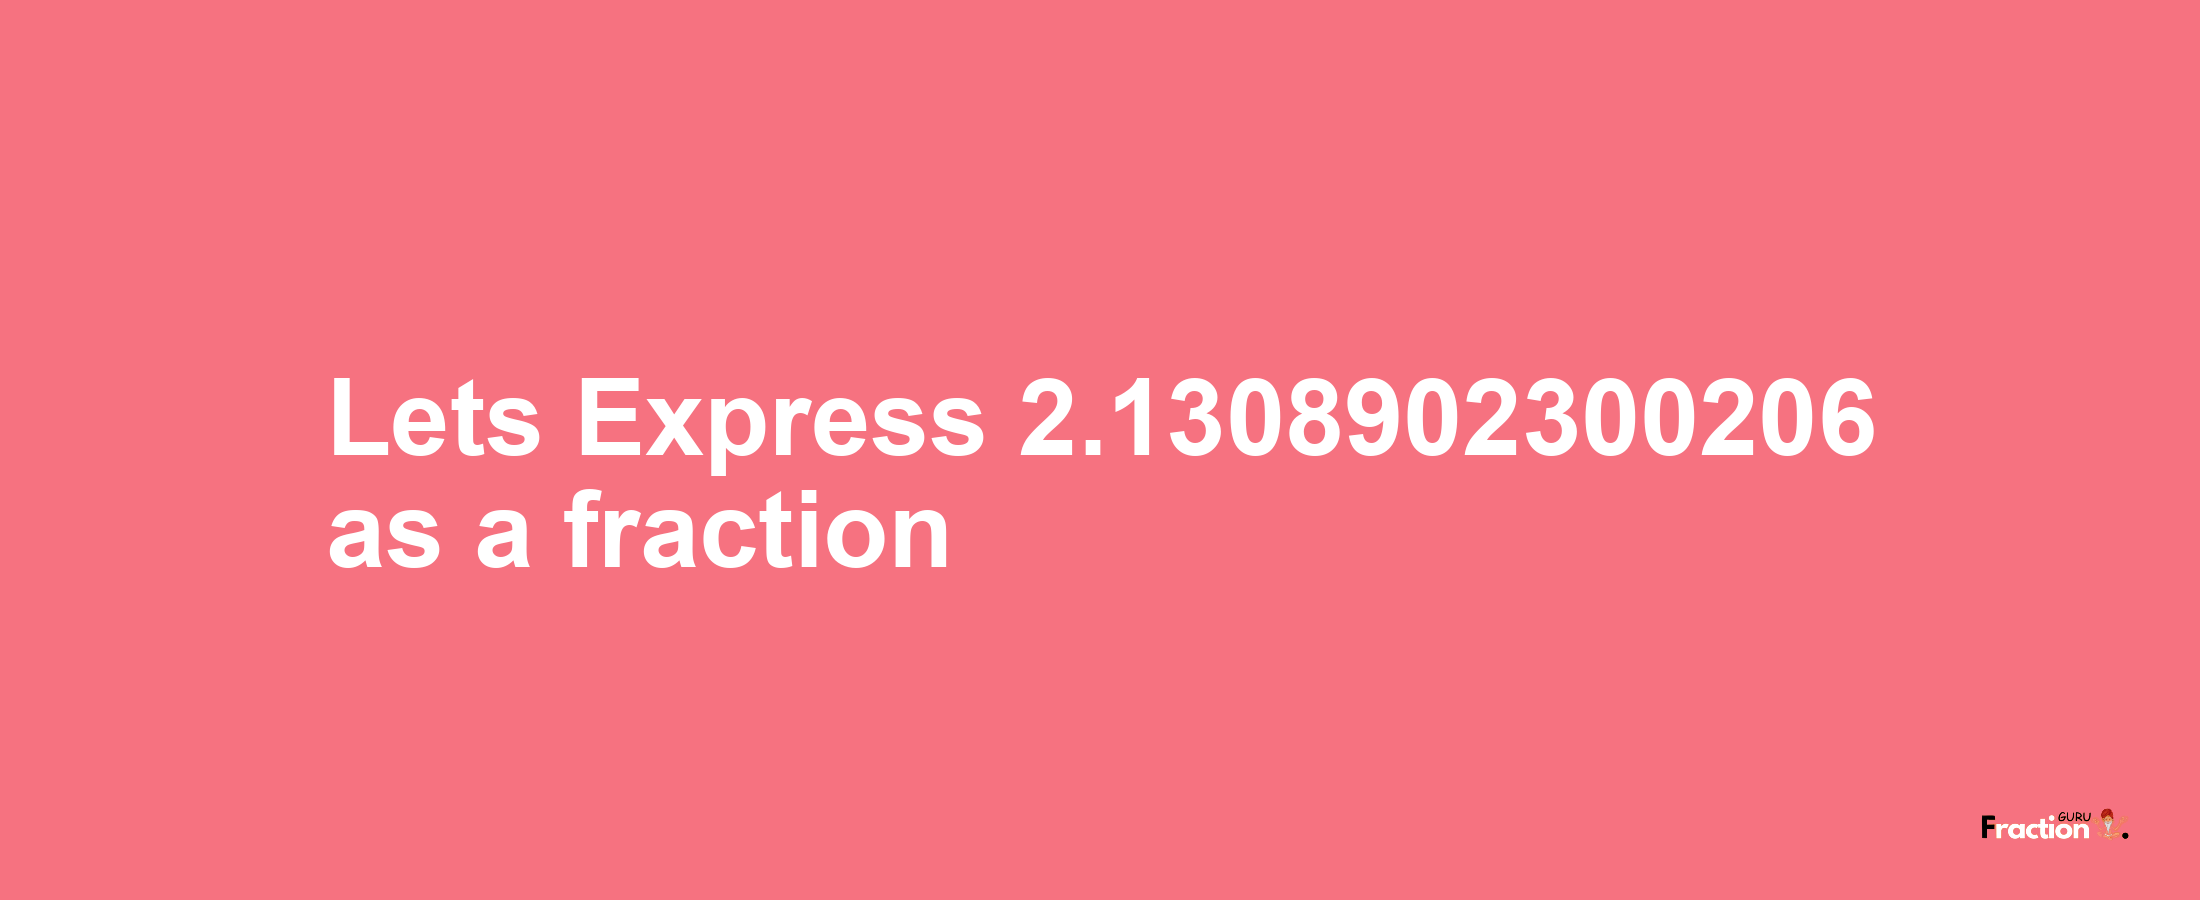 Lets Express 2.1308902300206 as afraction